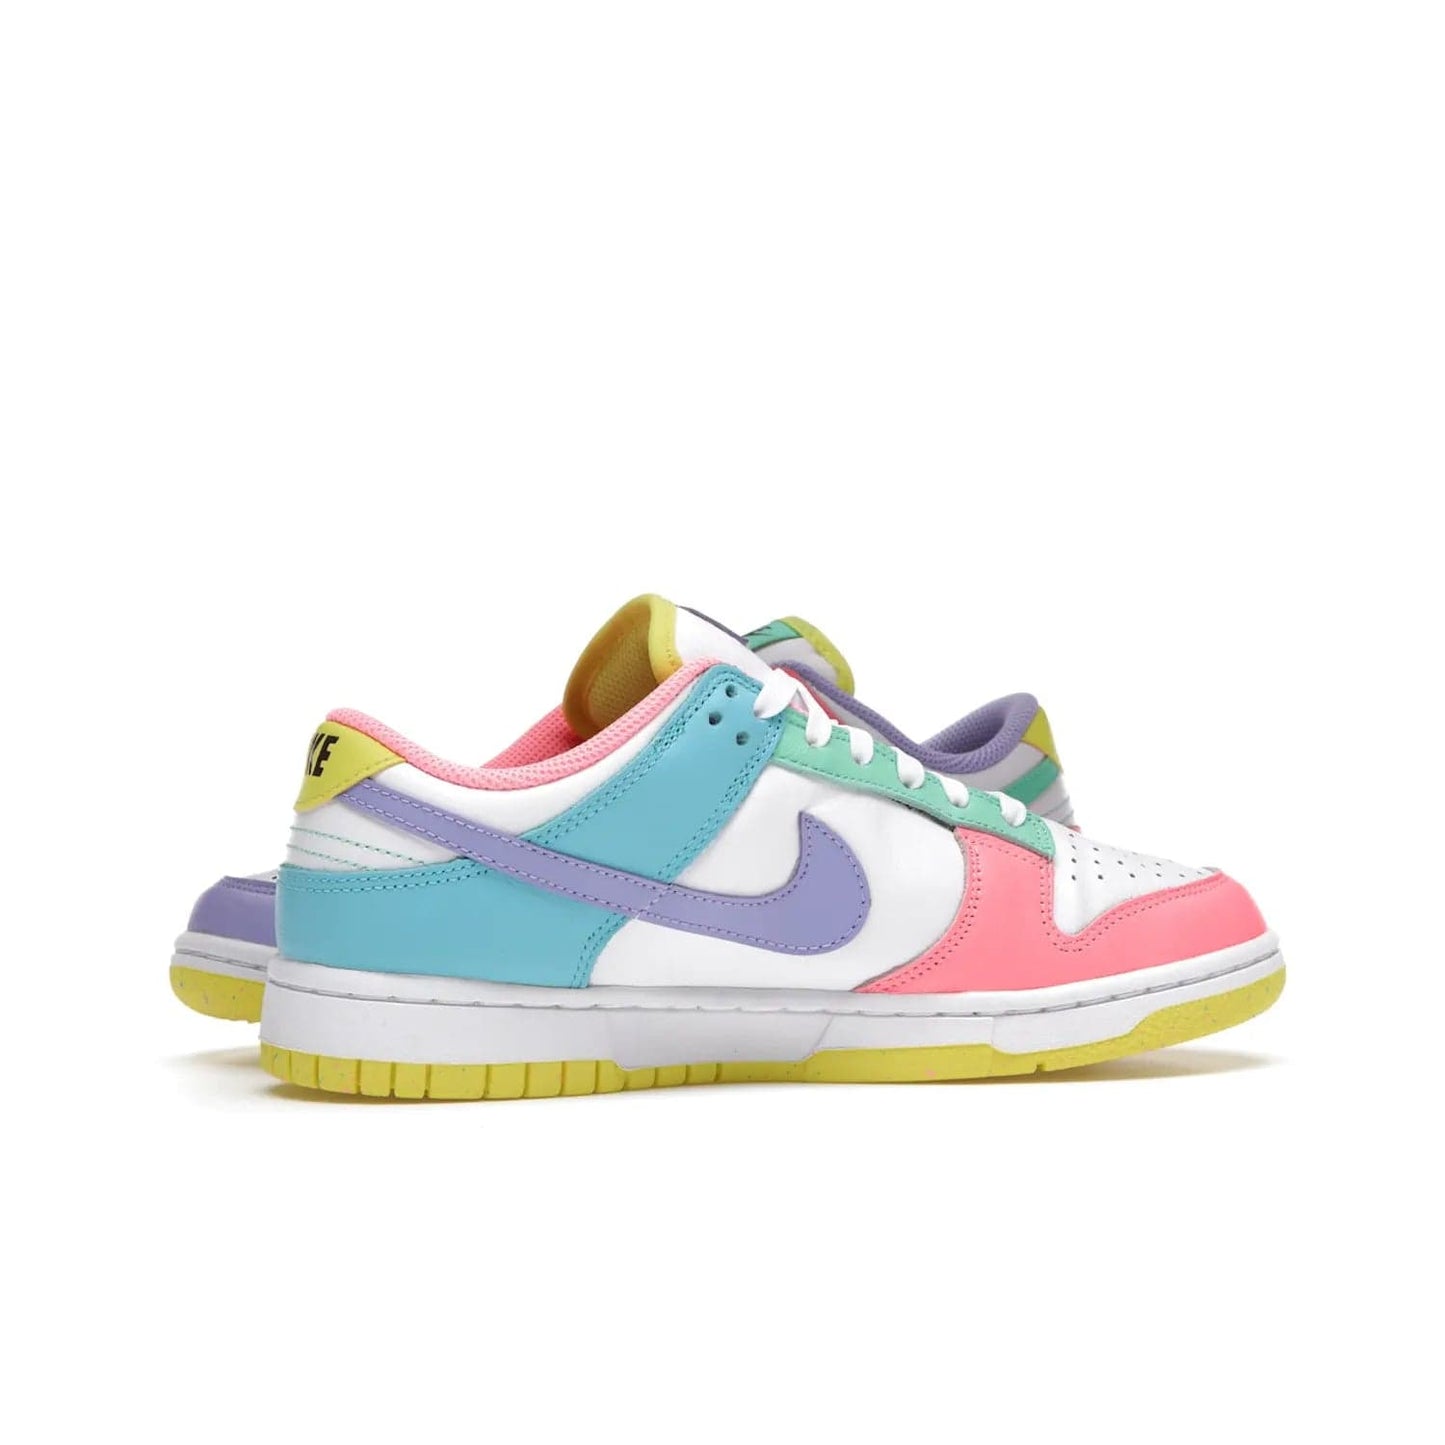 Nike Dunk Low SE Easter Candy (Women's) - Image 17 - Only at www.BallersClubKickz.com - UP
The Nike Dunk Low SE Easter Candy (Women's) brings a stylish touch to any outfit with its white leather upper, colorful accents, and multicolor speckle detailing. Shop now before they're gone.